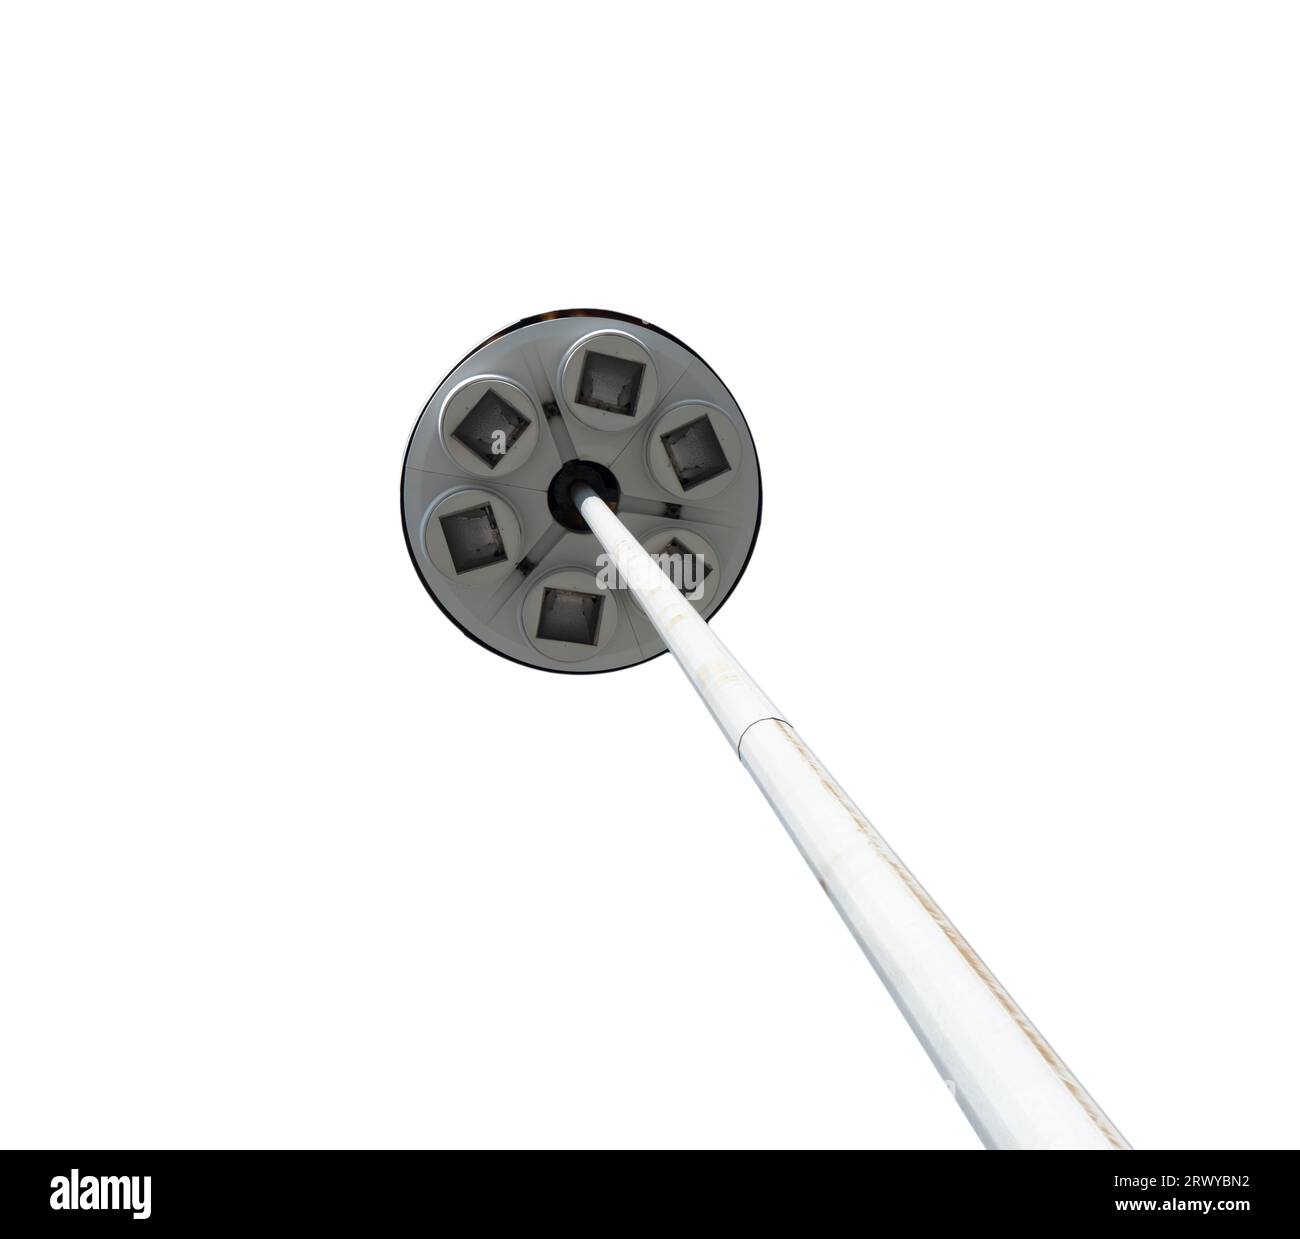 the street lighting pole on a transparent background Stock Photo